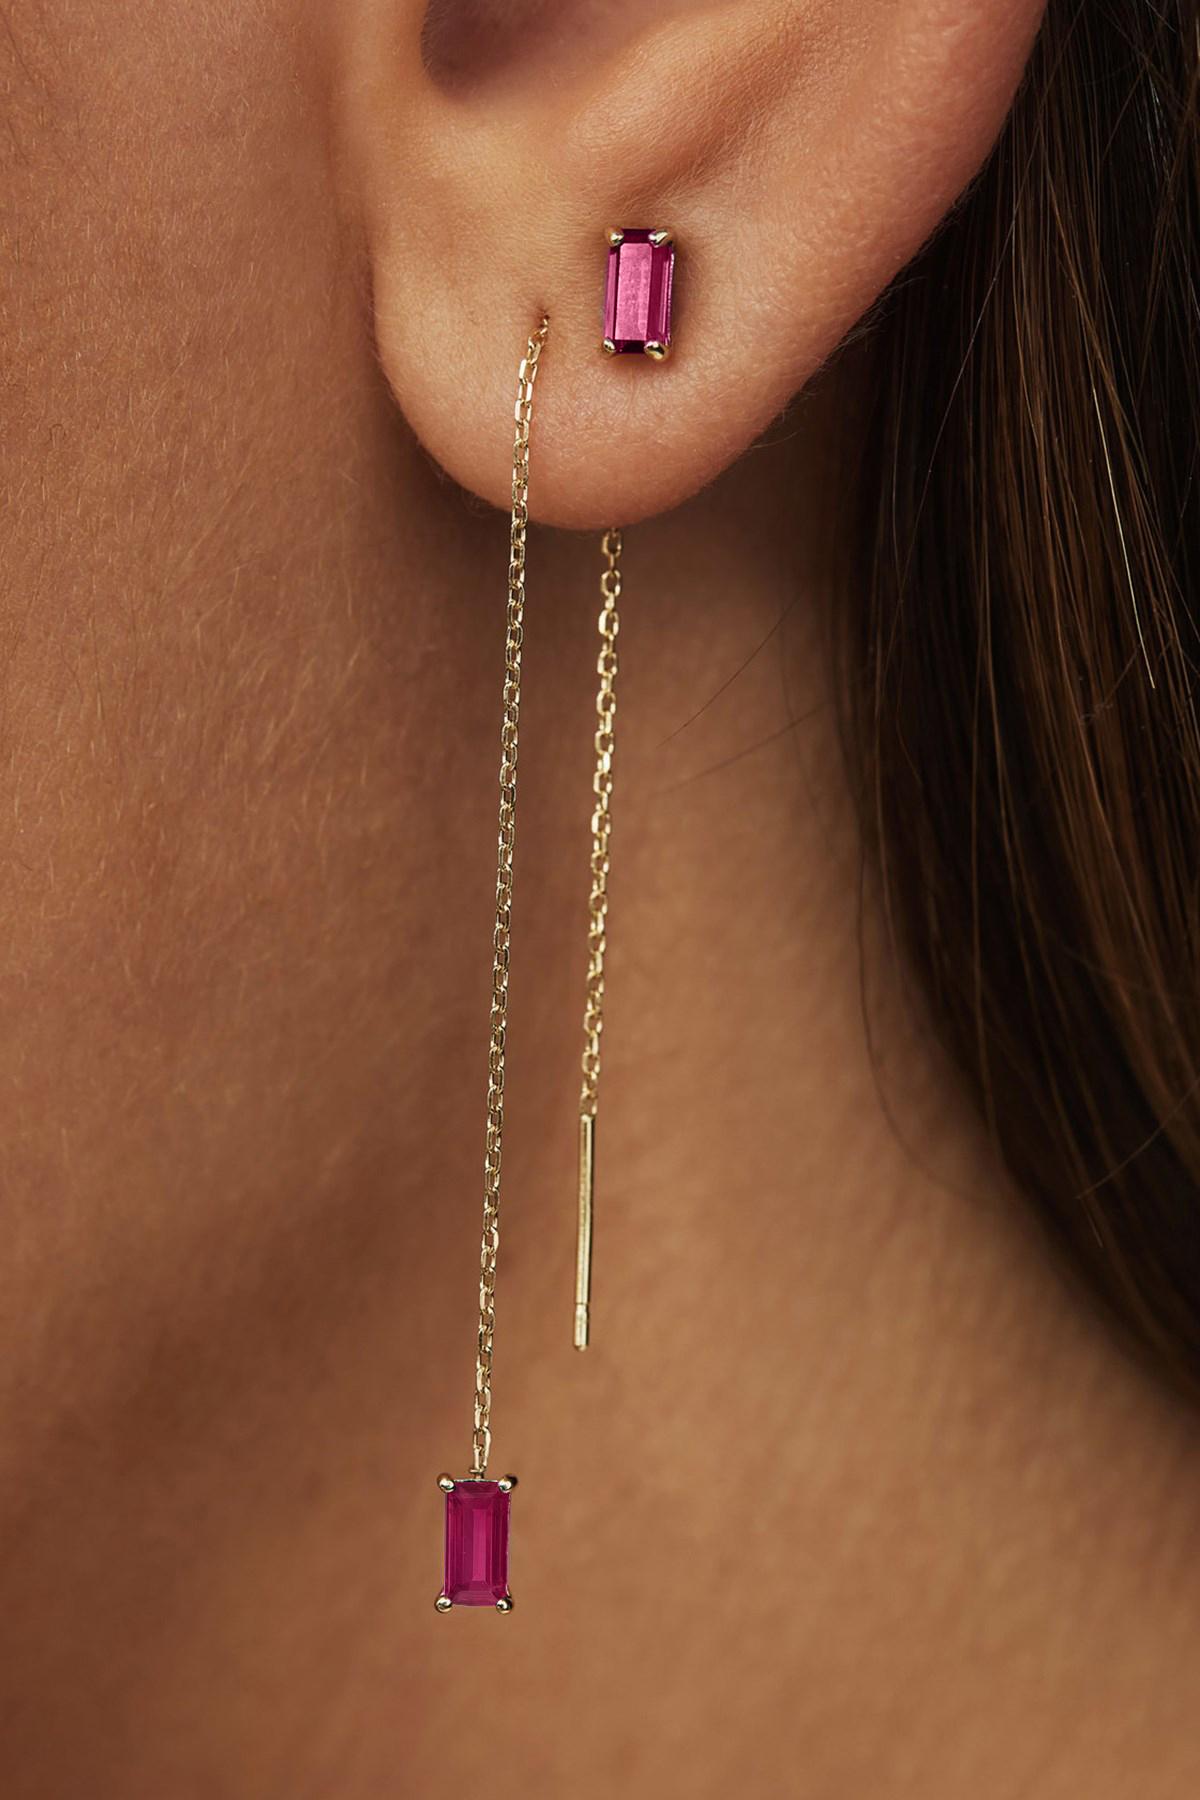 Natural Rubies gold earrings.  14k solid gold drop earrings with rubies.  Chain earrings. Baguette Earrings Dangle. Delicate Solid Gold chain Earrings.  14K Solid Gold Threader Chain Earrings. 

Metal: 14 karat yellow gold
Weight: 0.8-0.9 g.
Size: